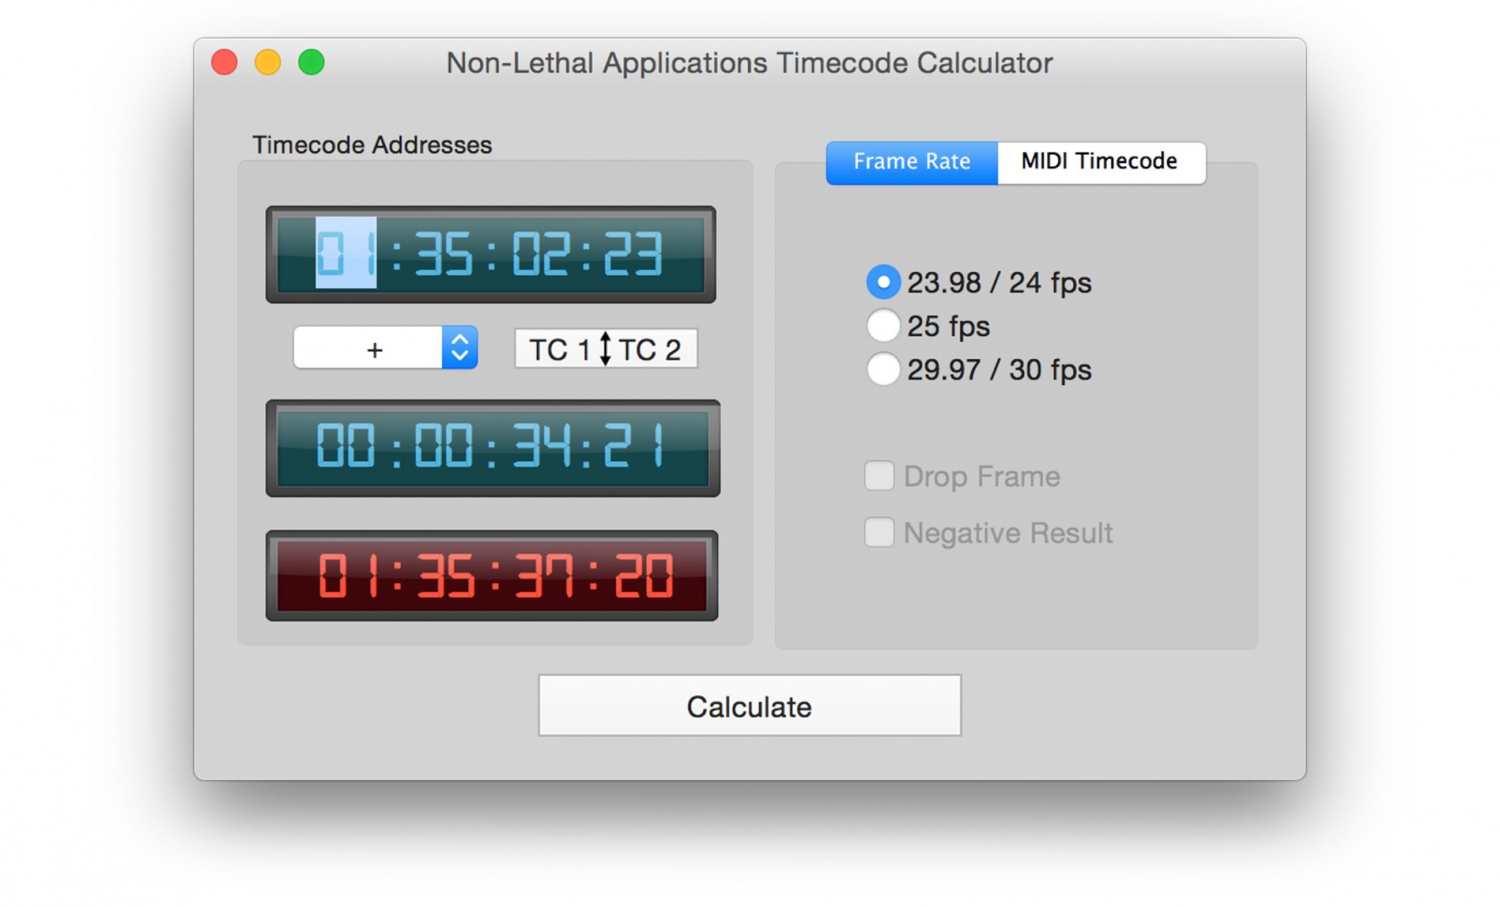 Timecode Calculator free studio-tool by Non-Lethal Applications